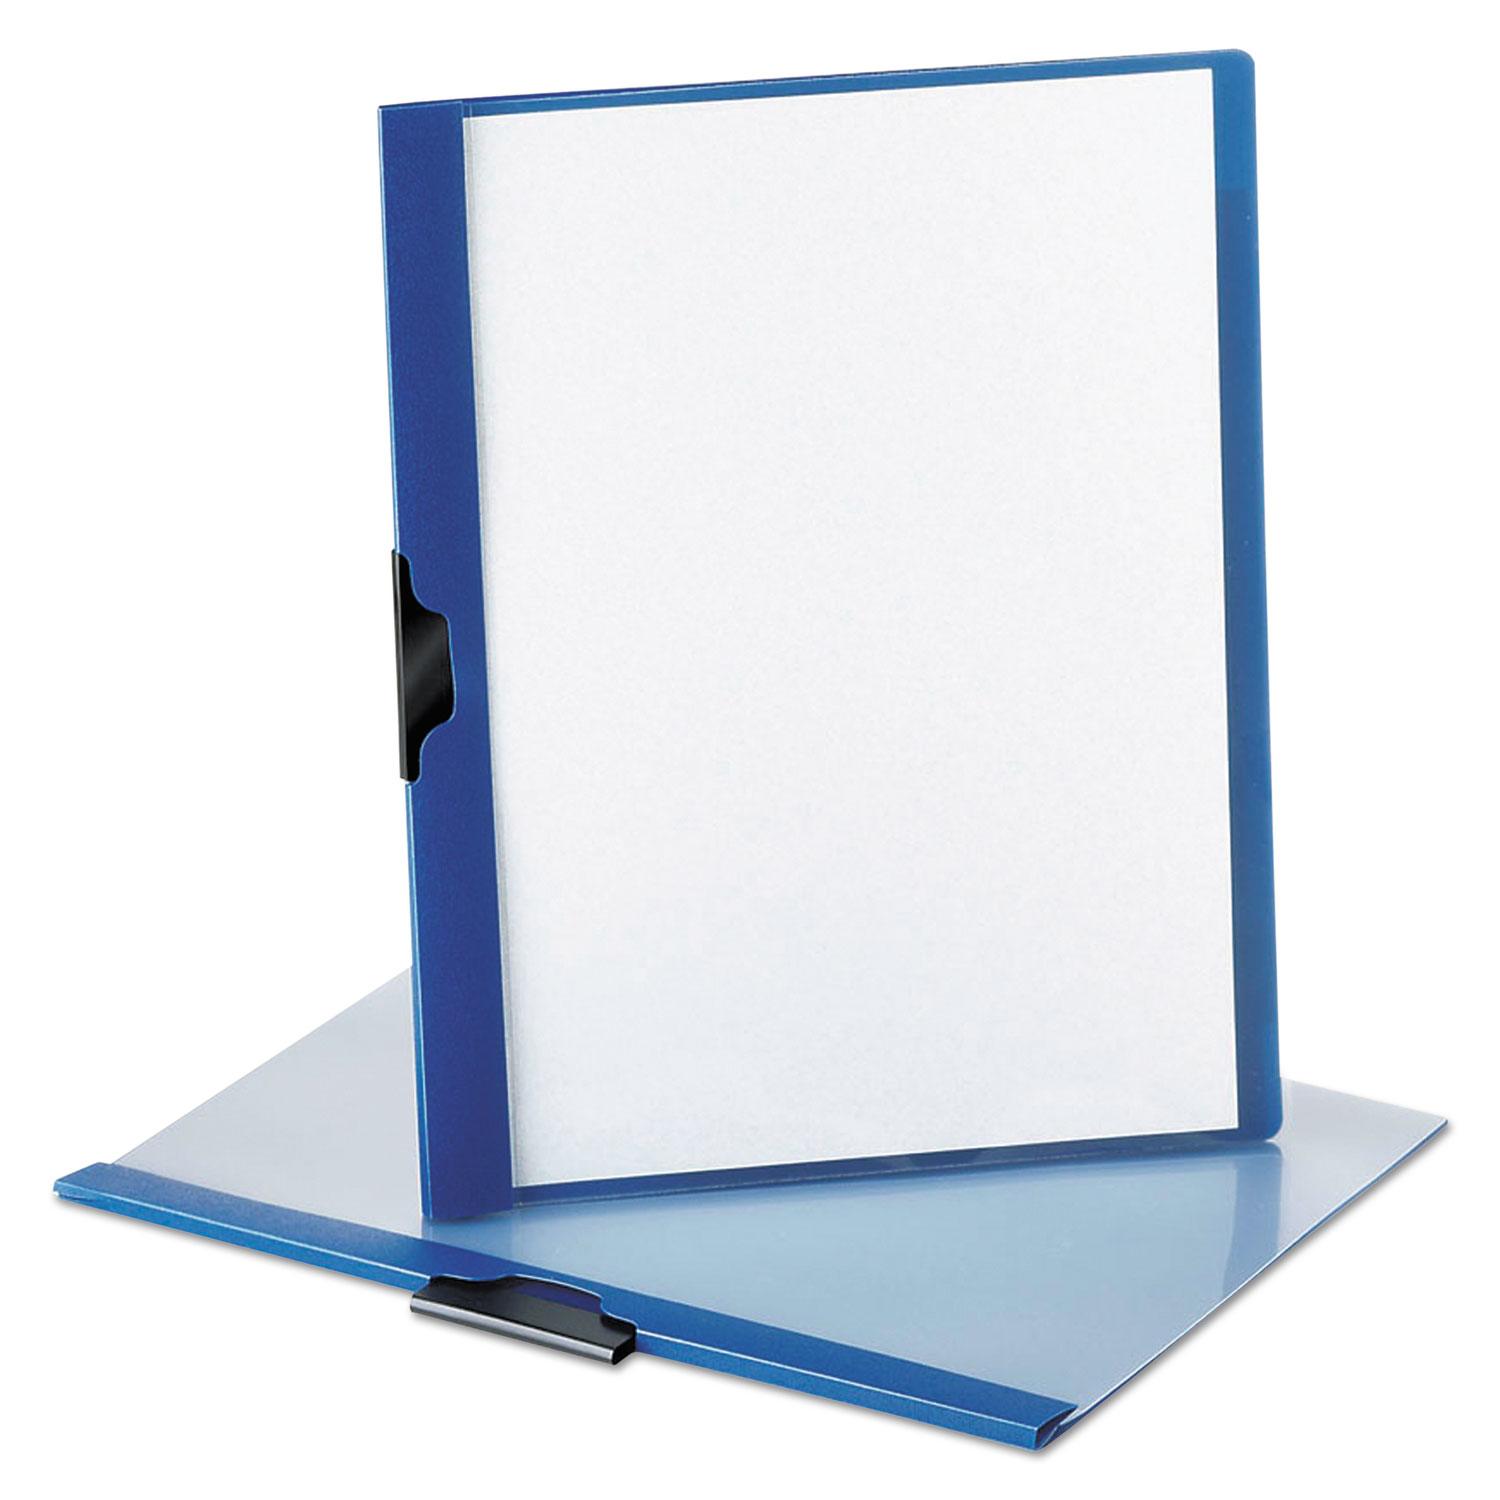 No-Punch Report Cover, Letter, Clip Holds 30 Pages, Clear/Blue